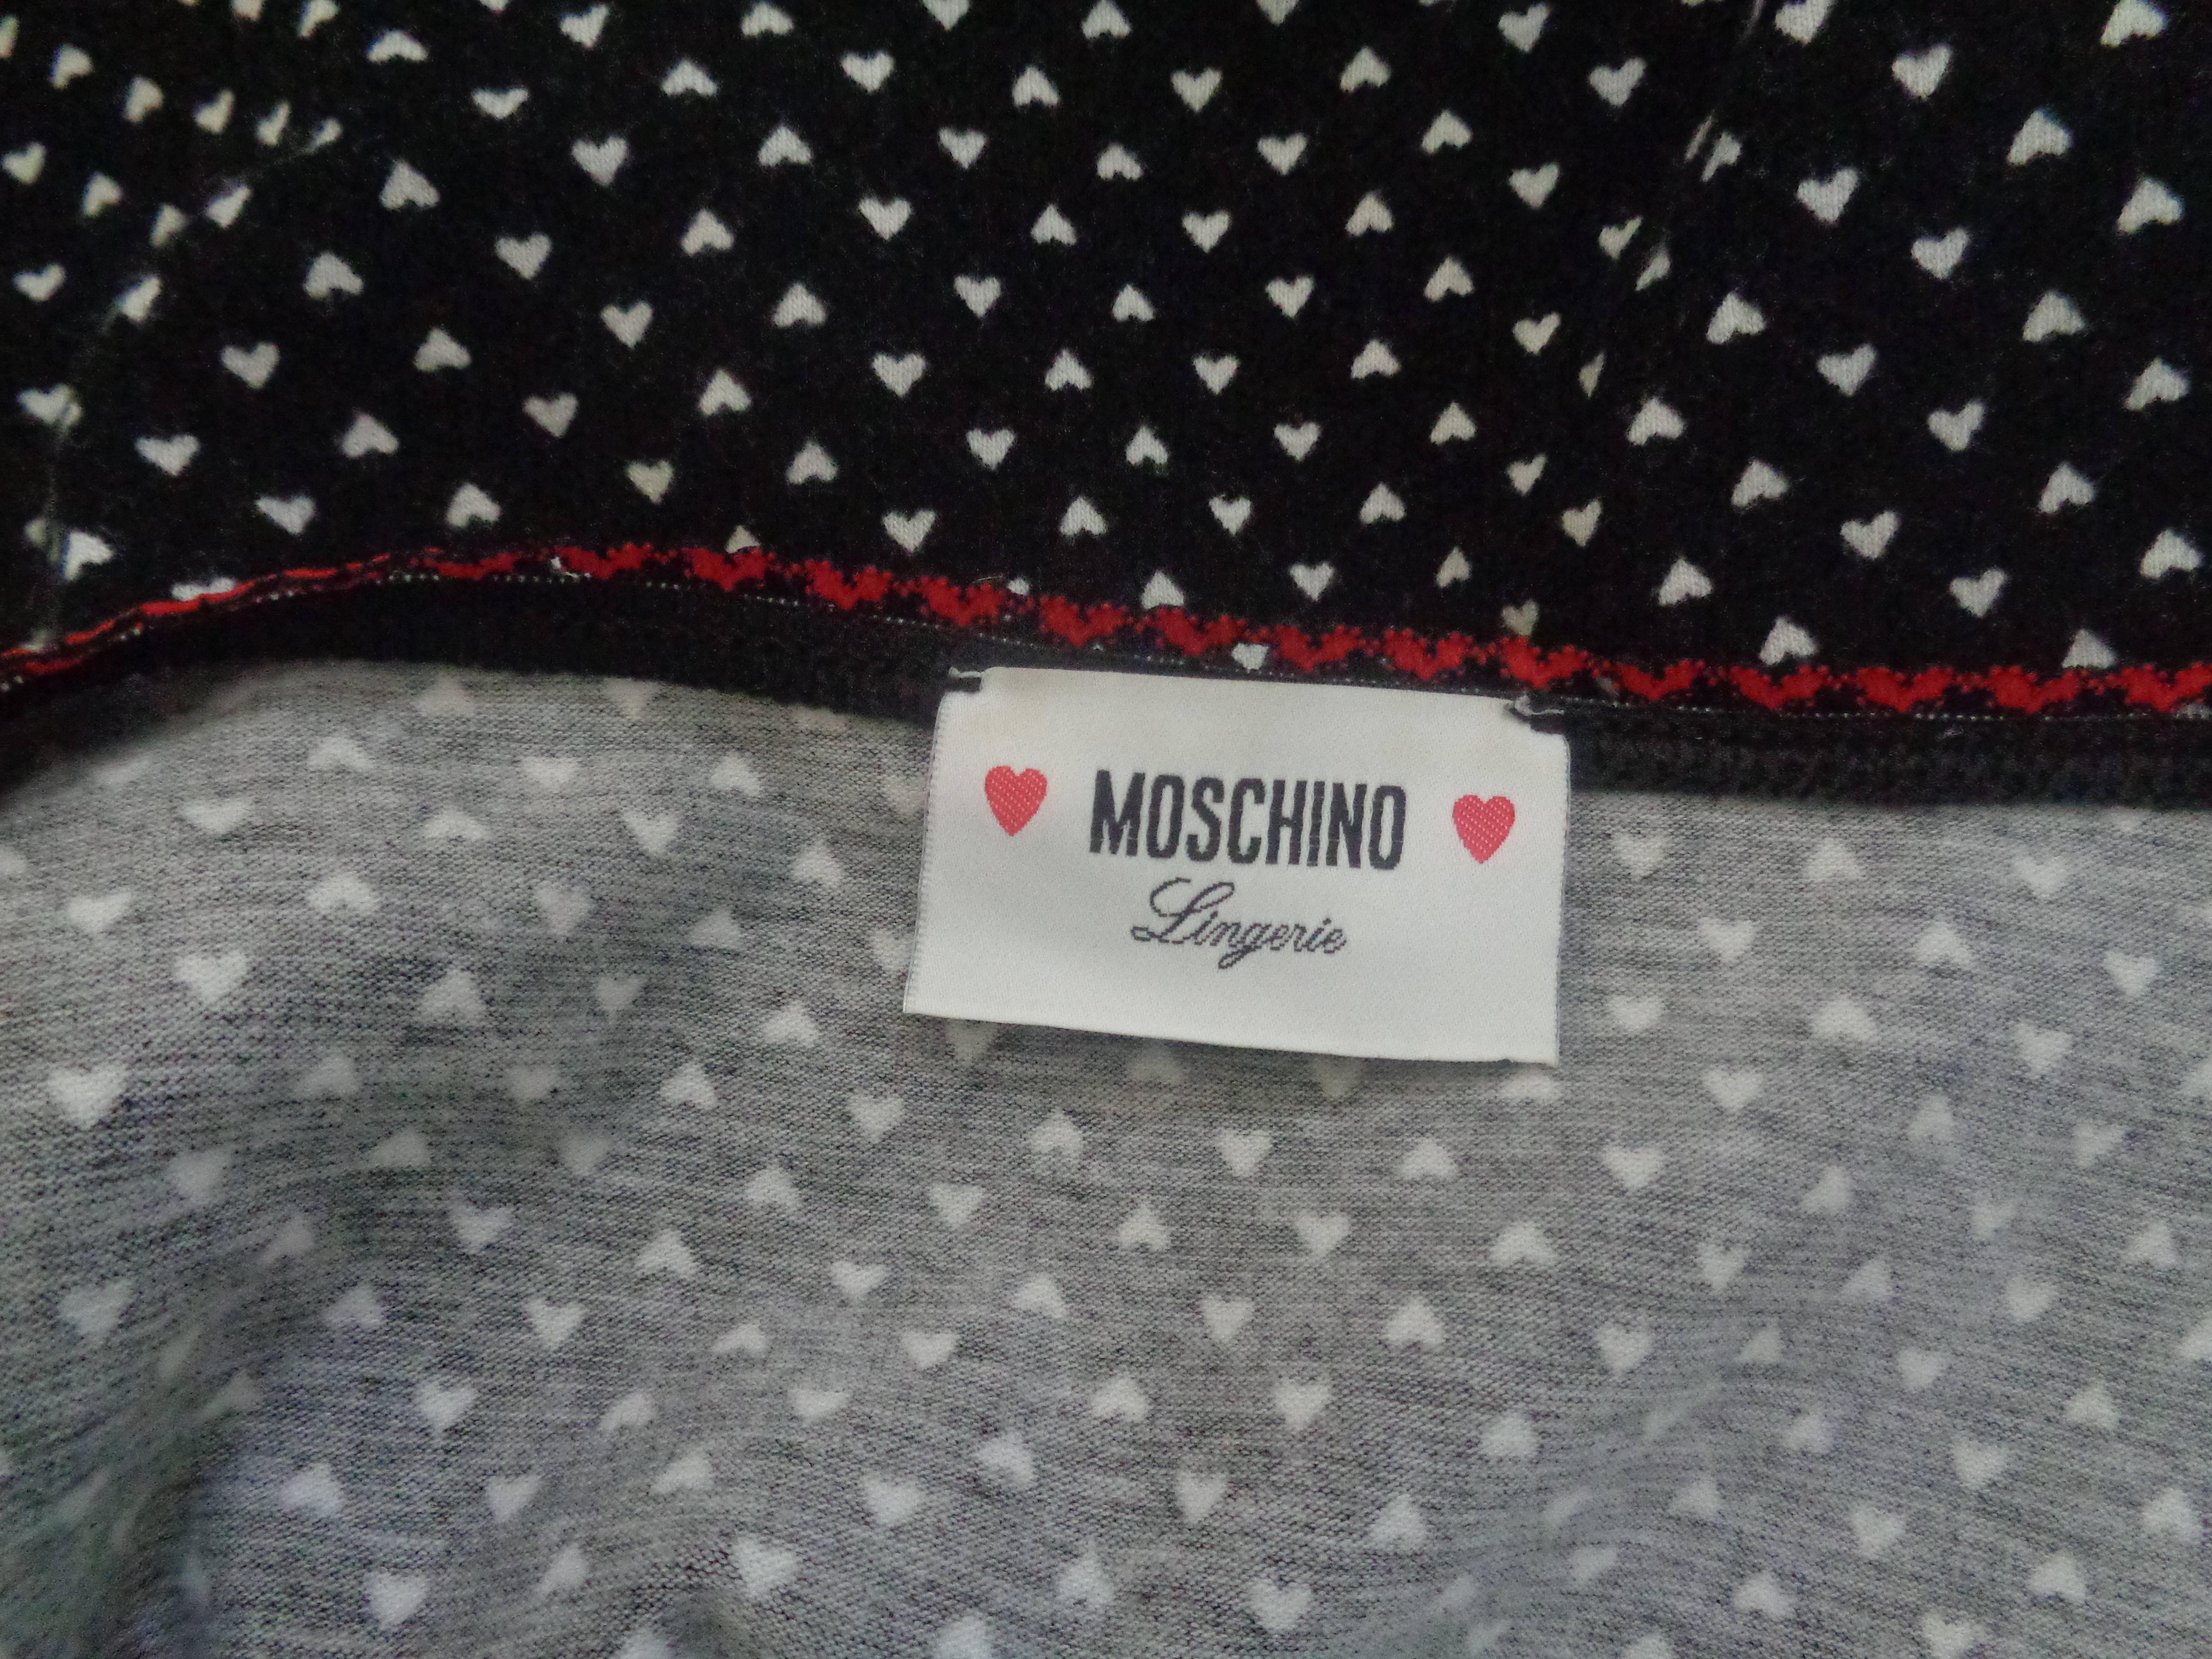 Moschino Black with White hearts cotton shirt In Excellent Condition For Sale In Capri, IT